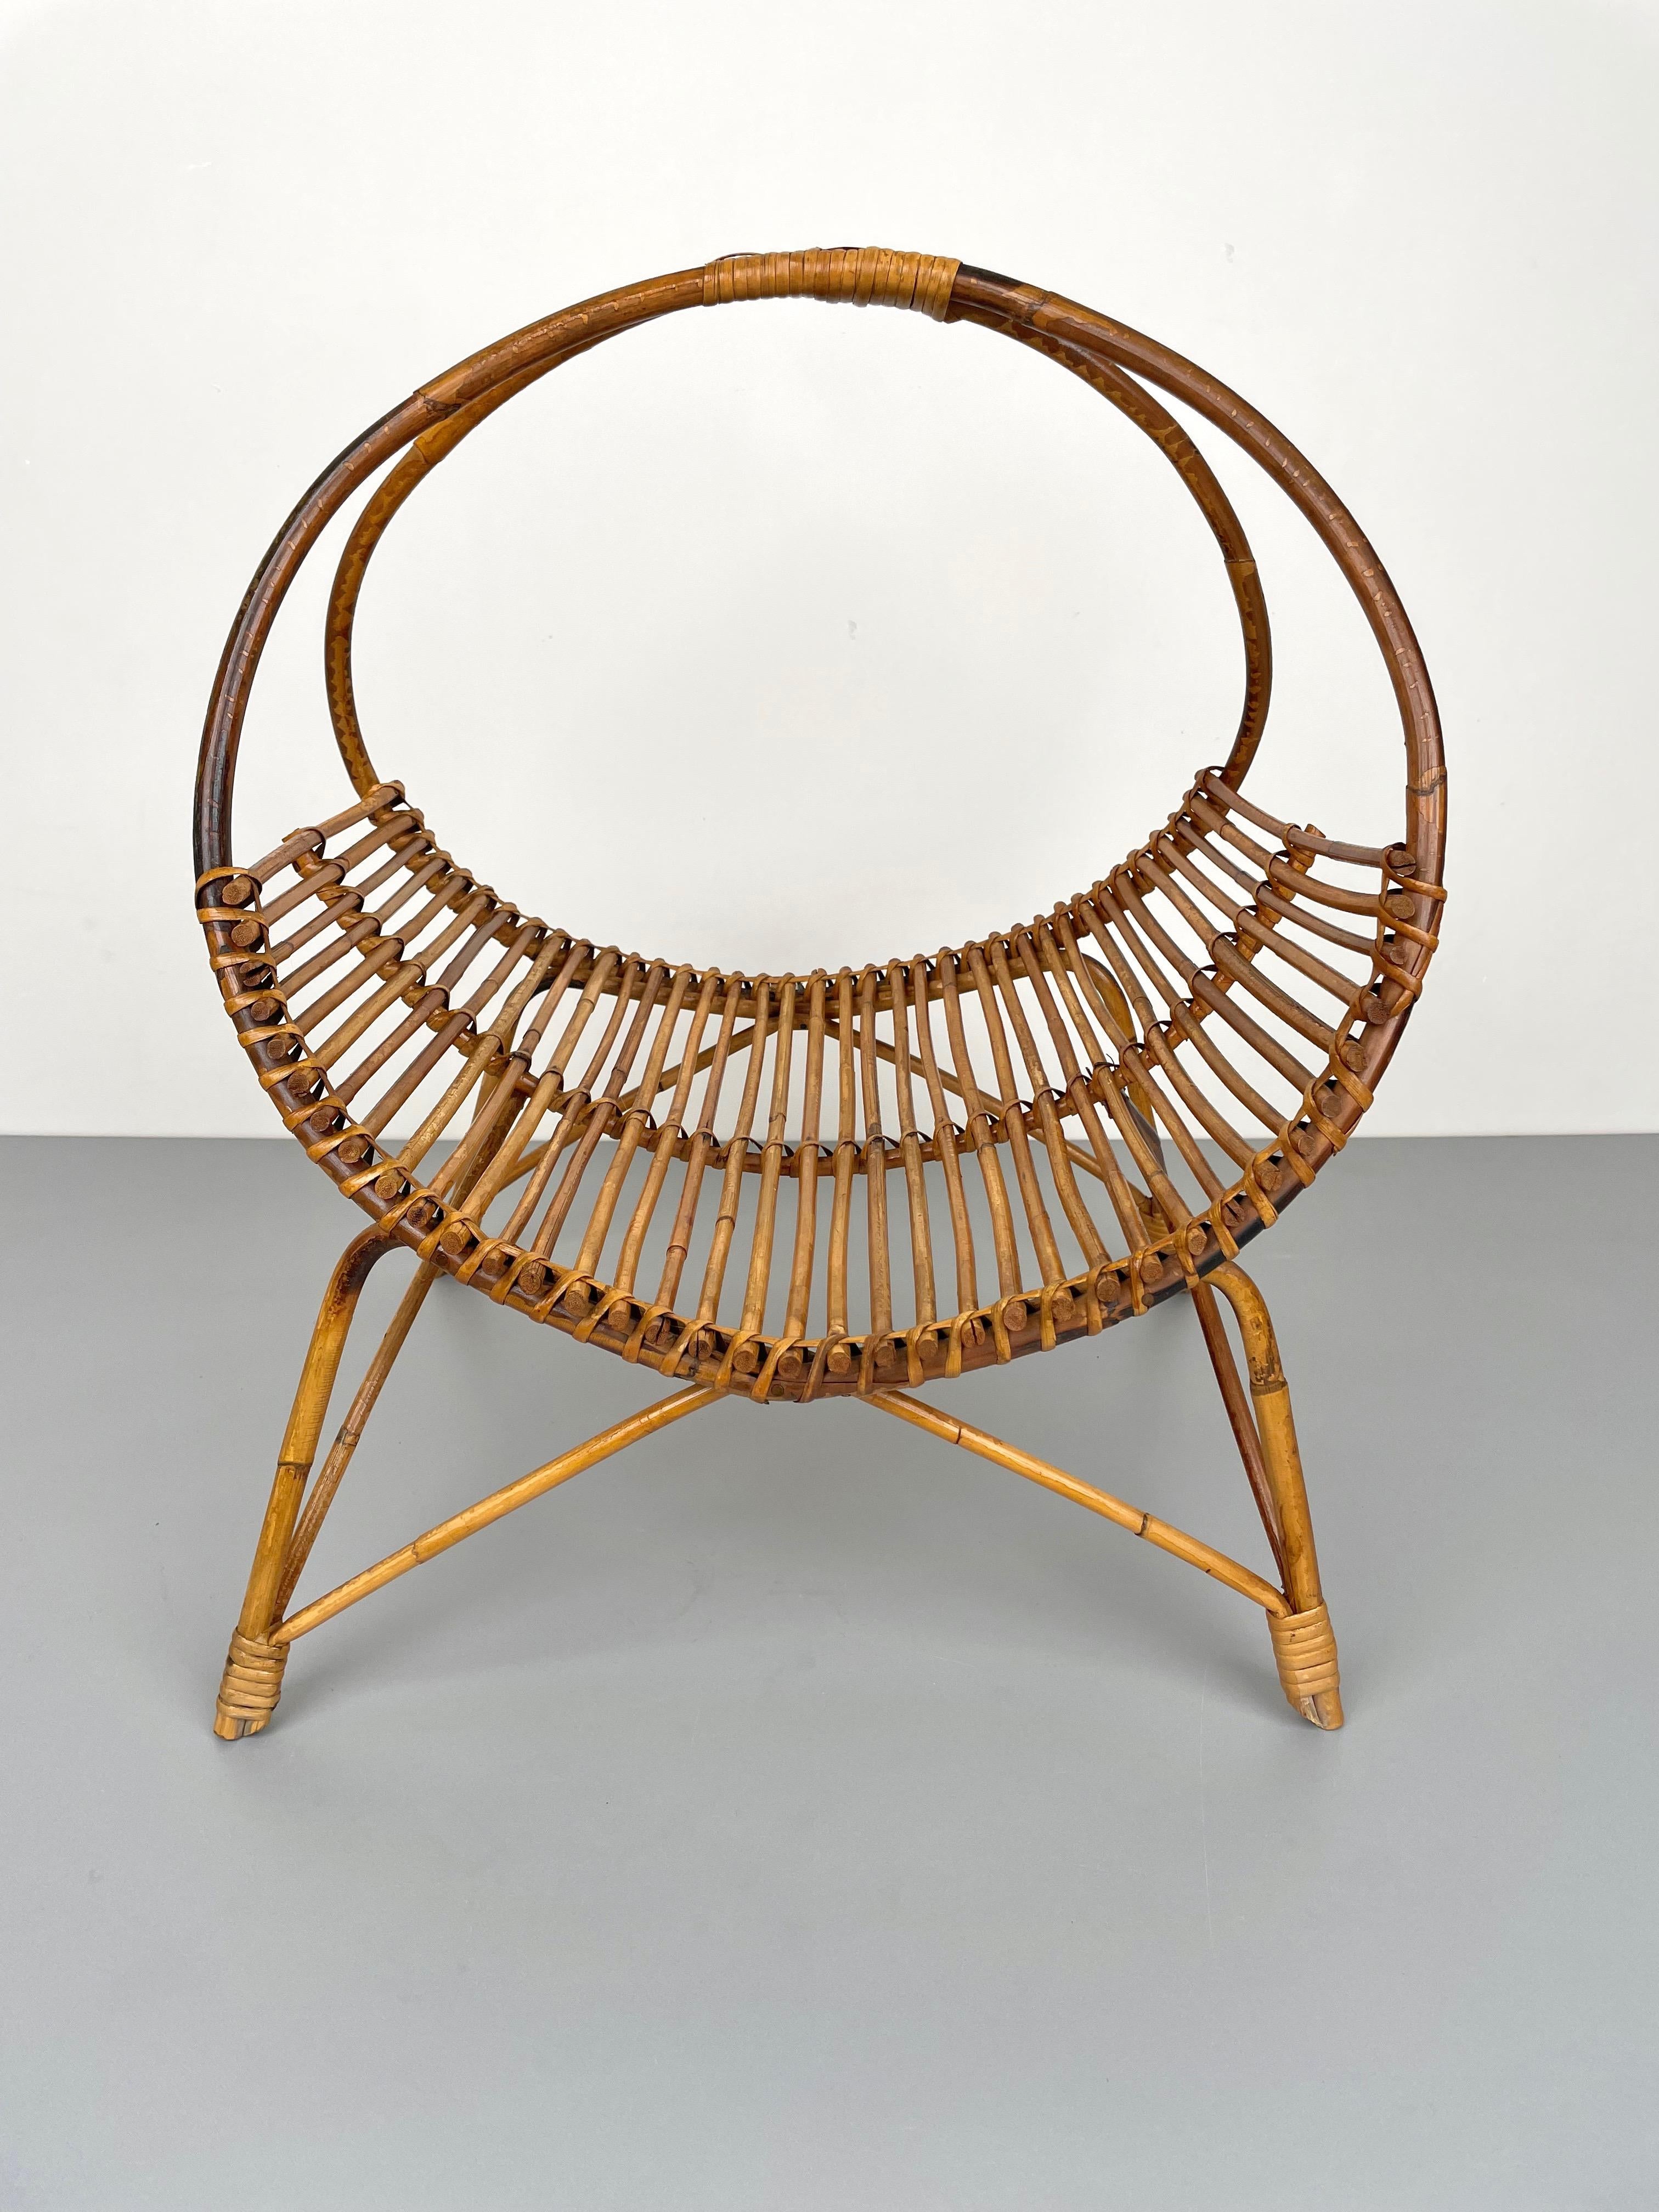 Magazine rack in bamboo and rattan, elevated and curved, made in Italy in the 1960s.